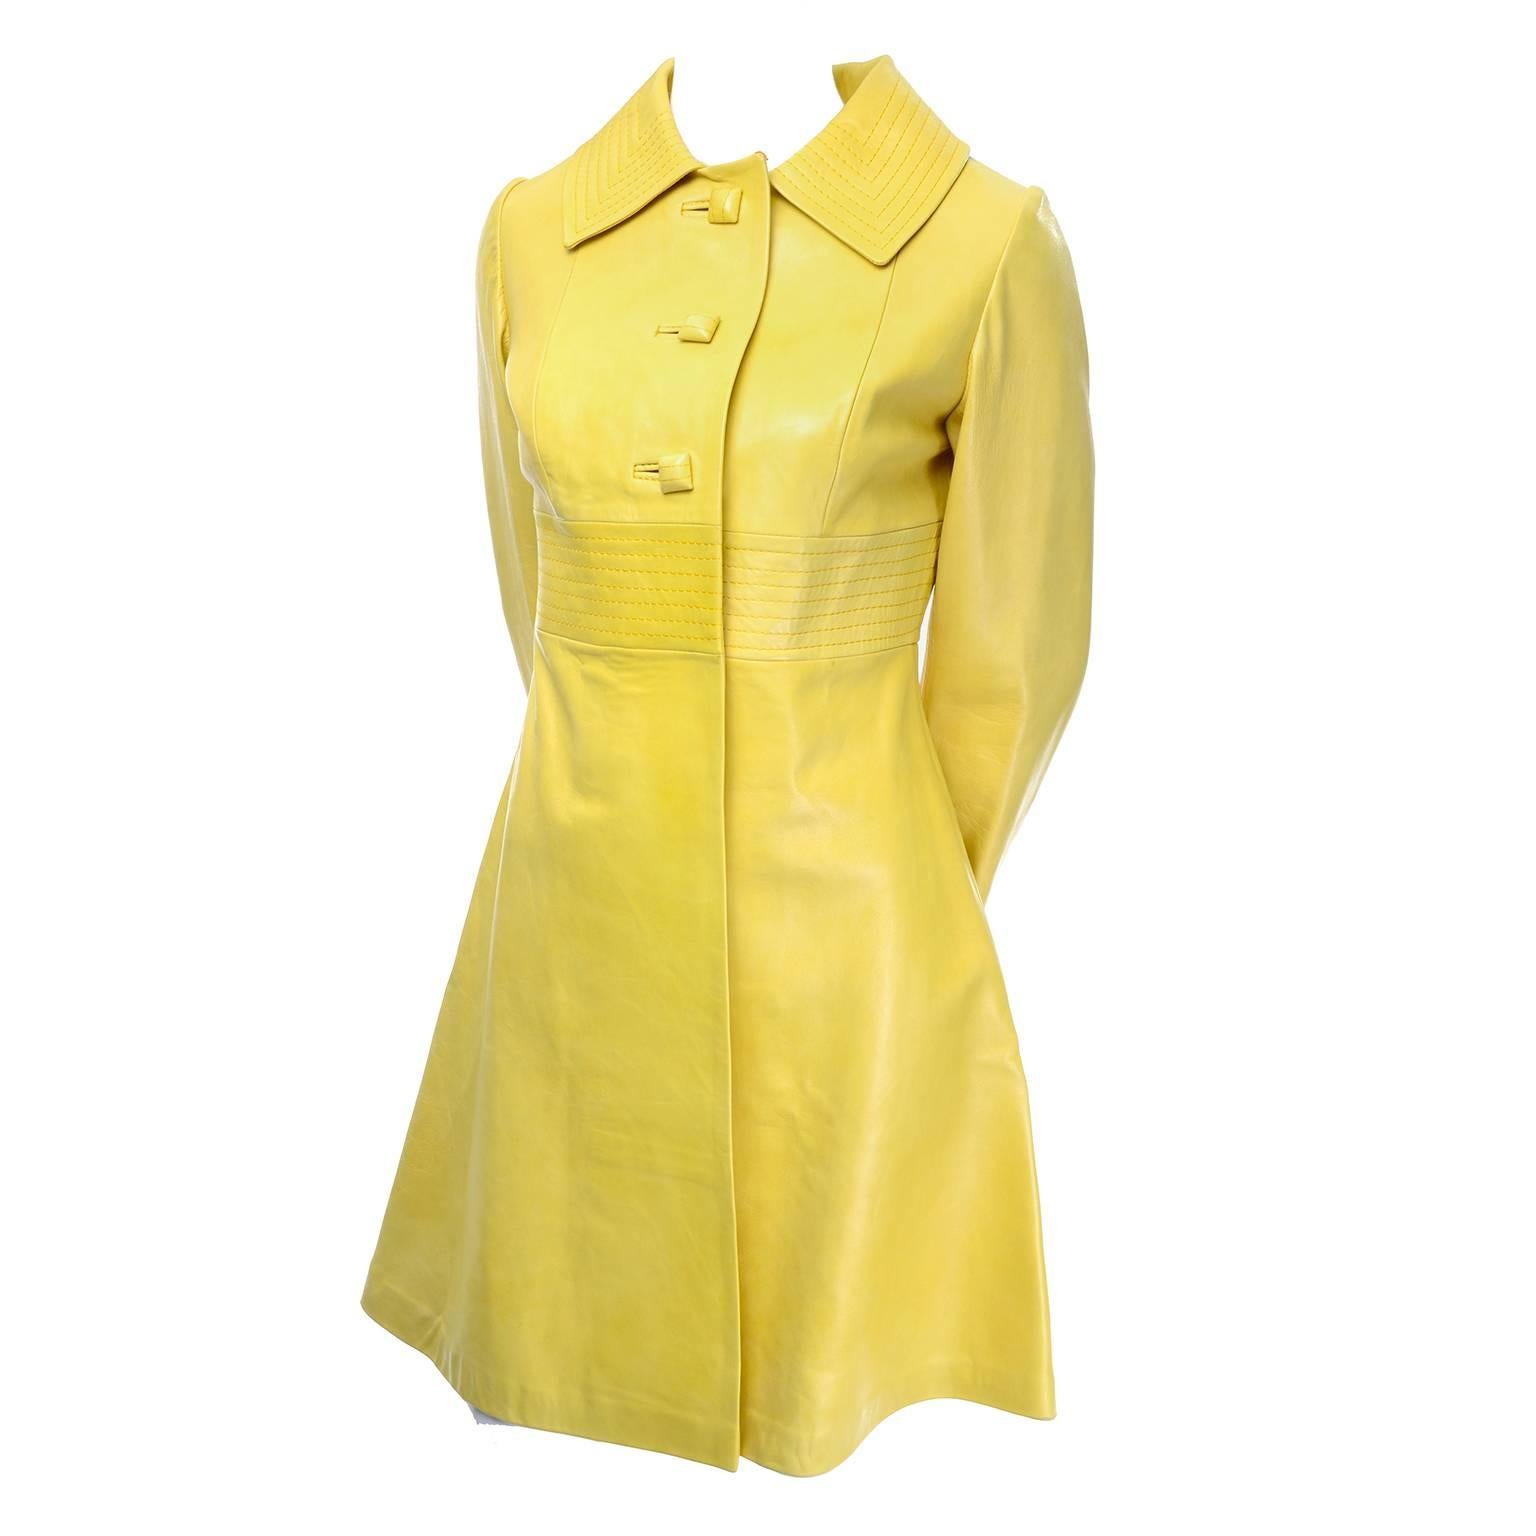 Mod Yellow 1960s Vintage Leather Coat Square Buttons Lined Size 2/4